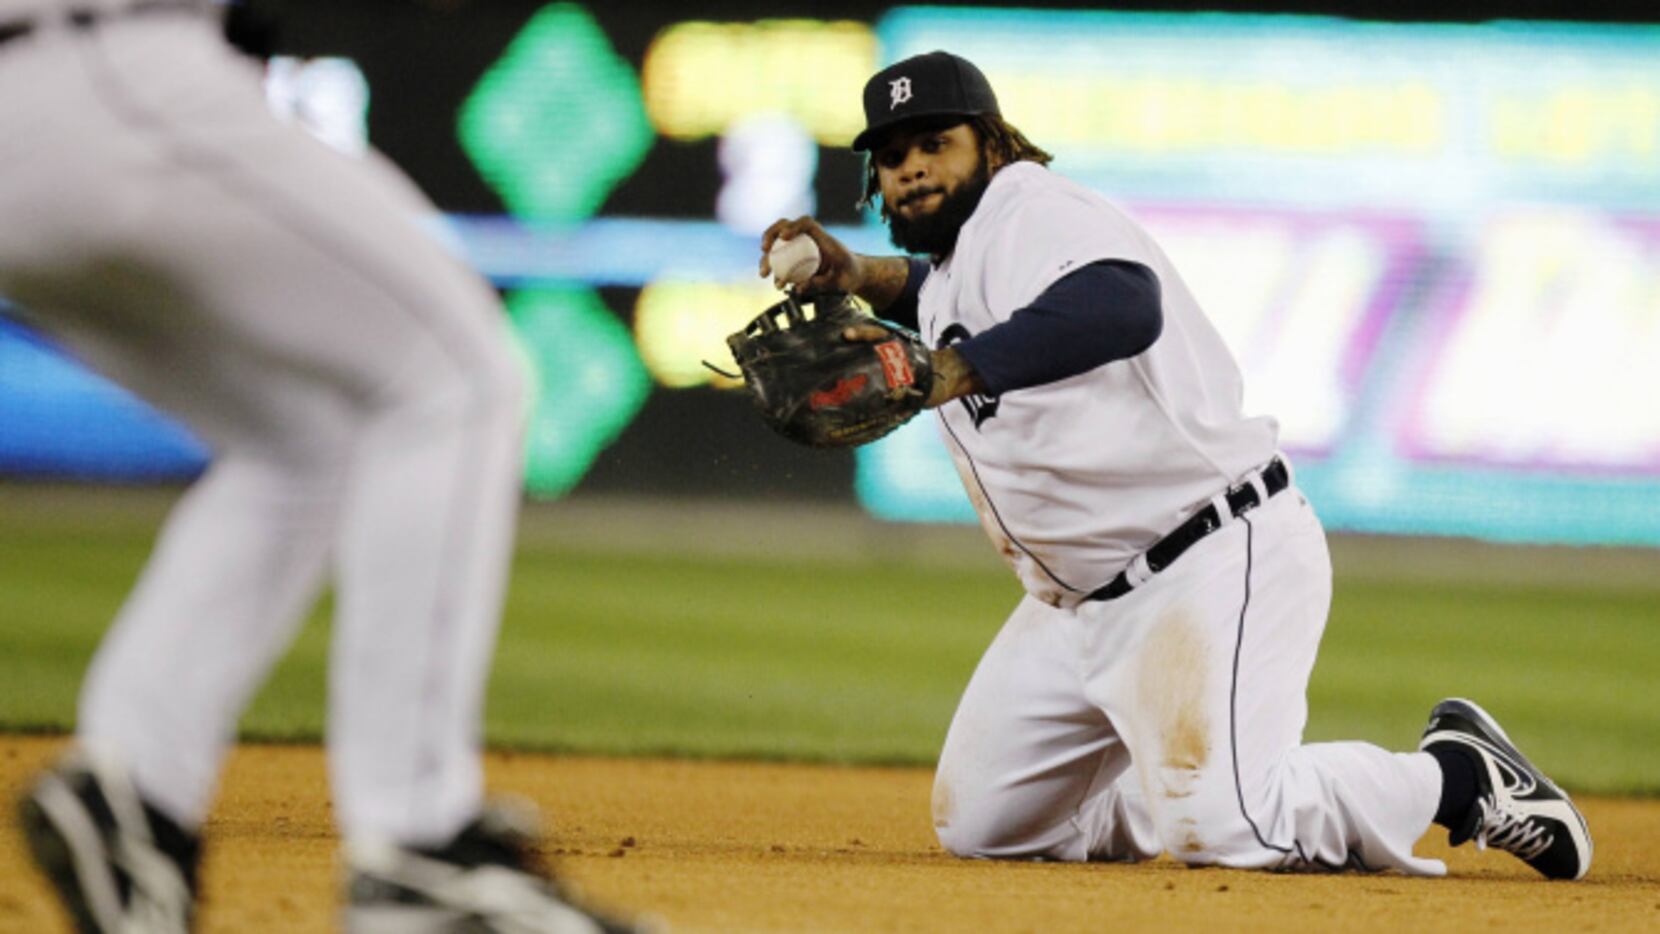 A look back at the Prince Fielder, Ian Kinsler trade four years